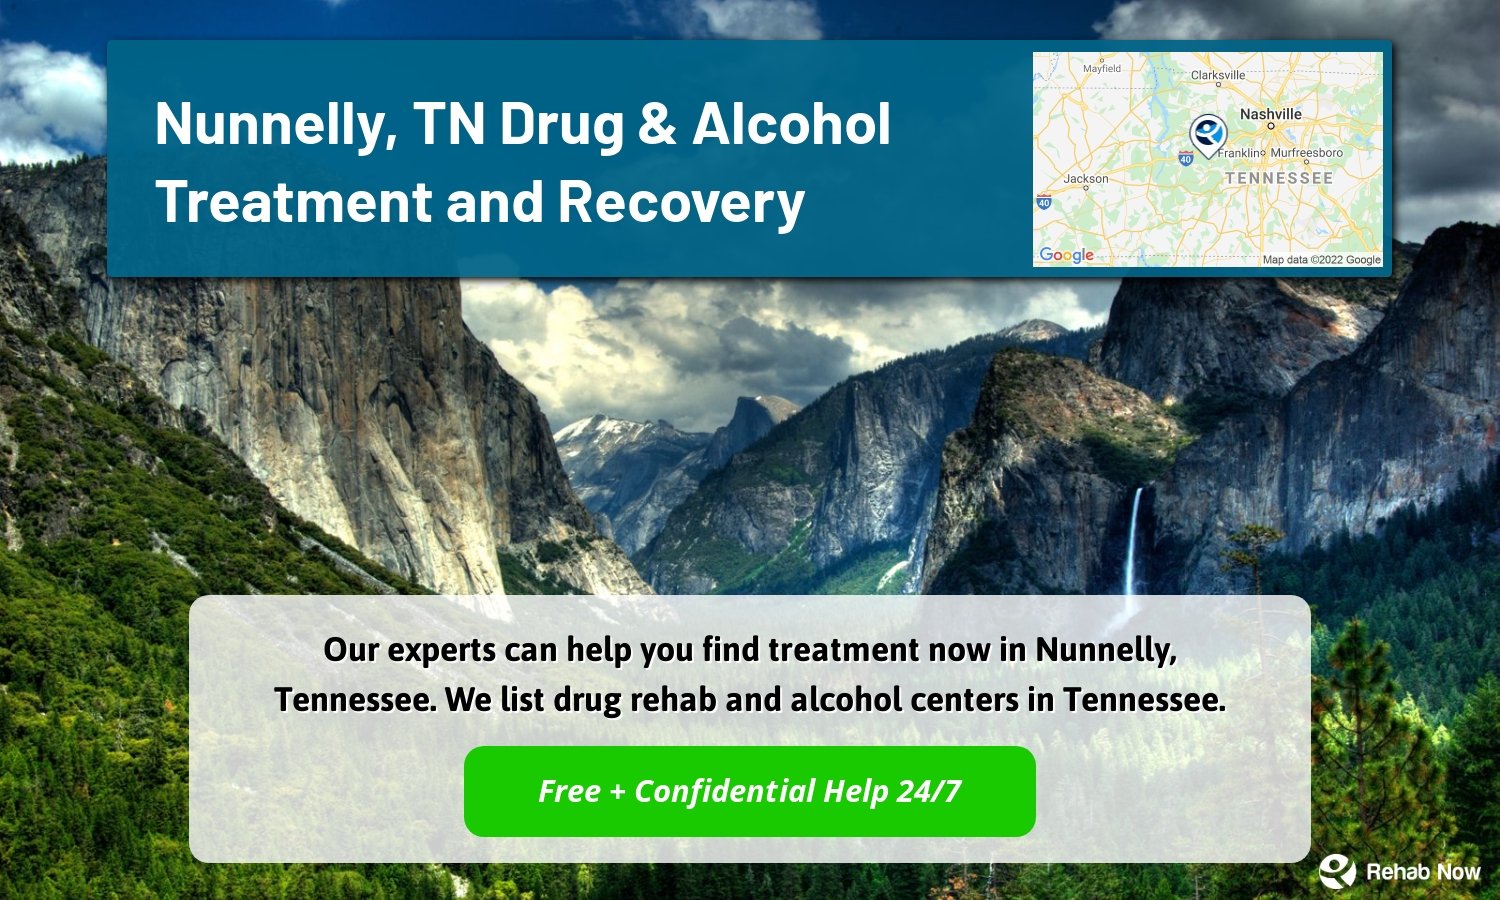 Our experts can help you find treatment now in Nunnelly, Tennessee. We list drug rehab and alcohol centers in Tennessee.